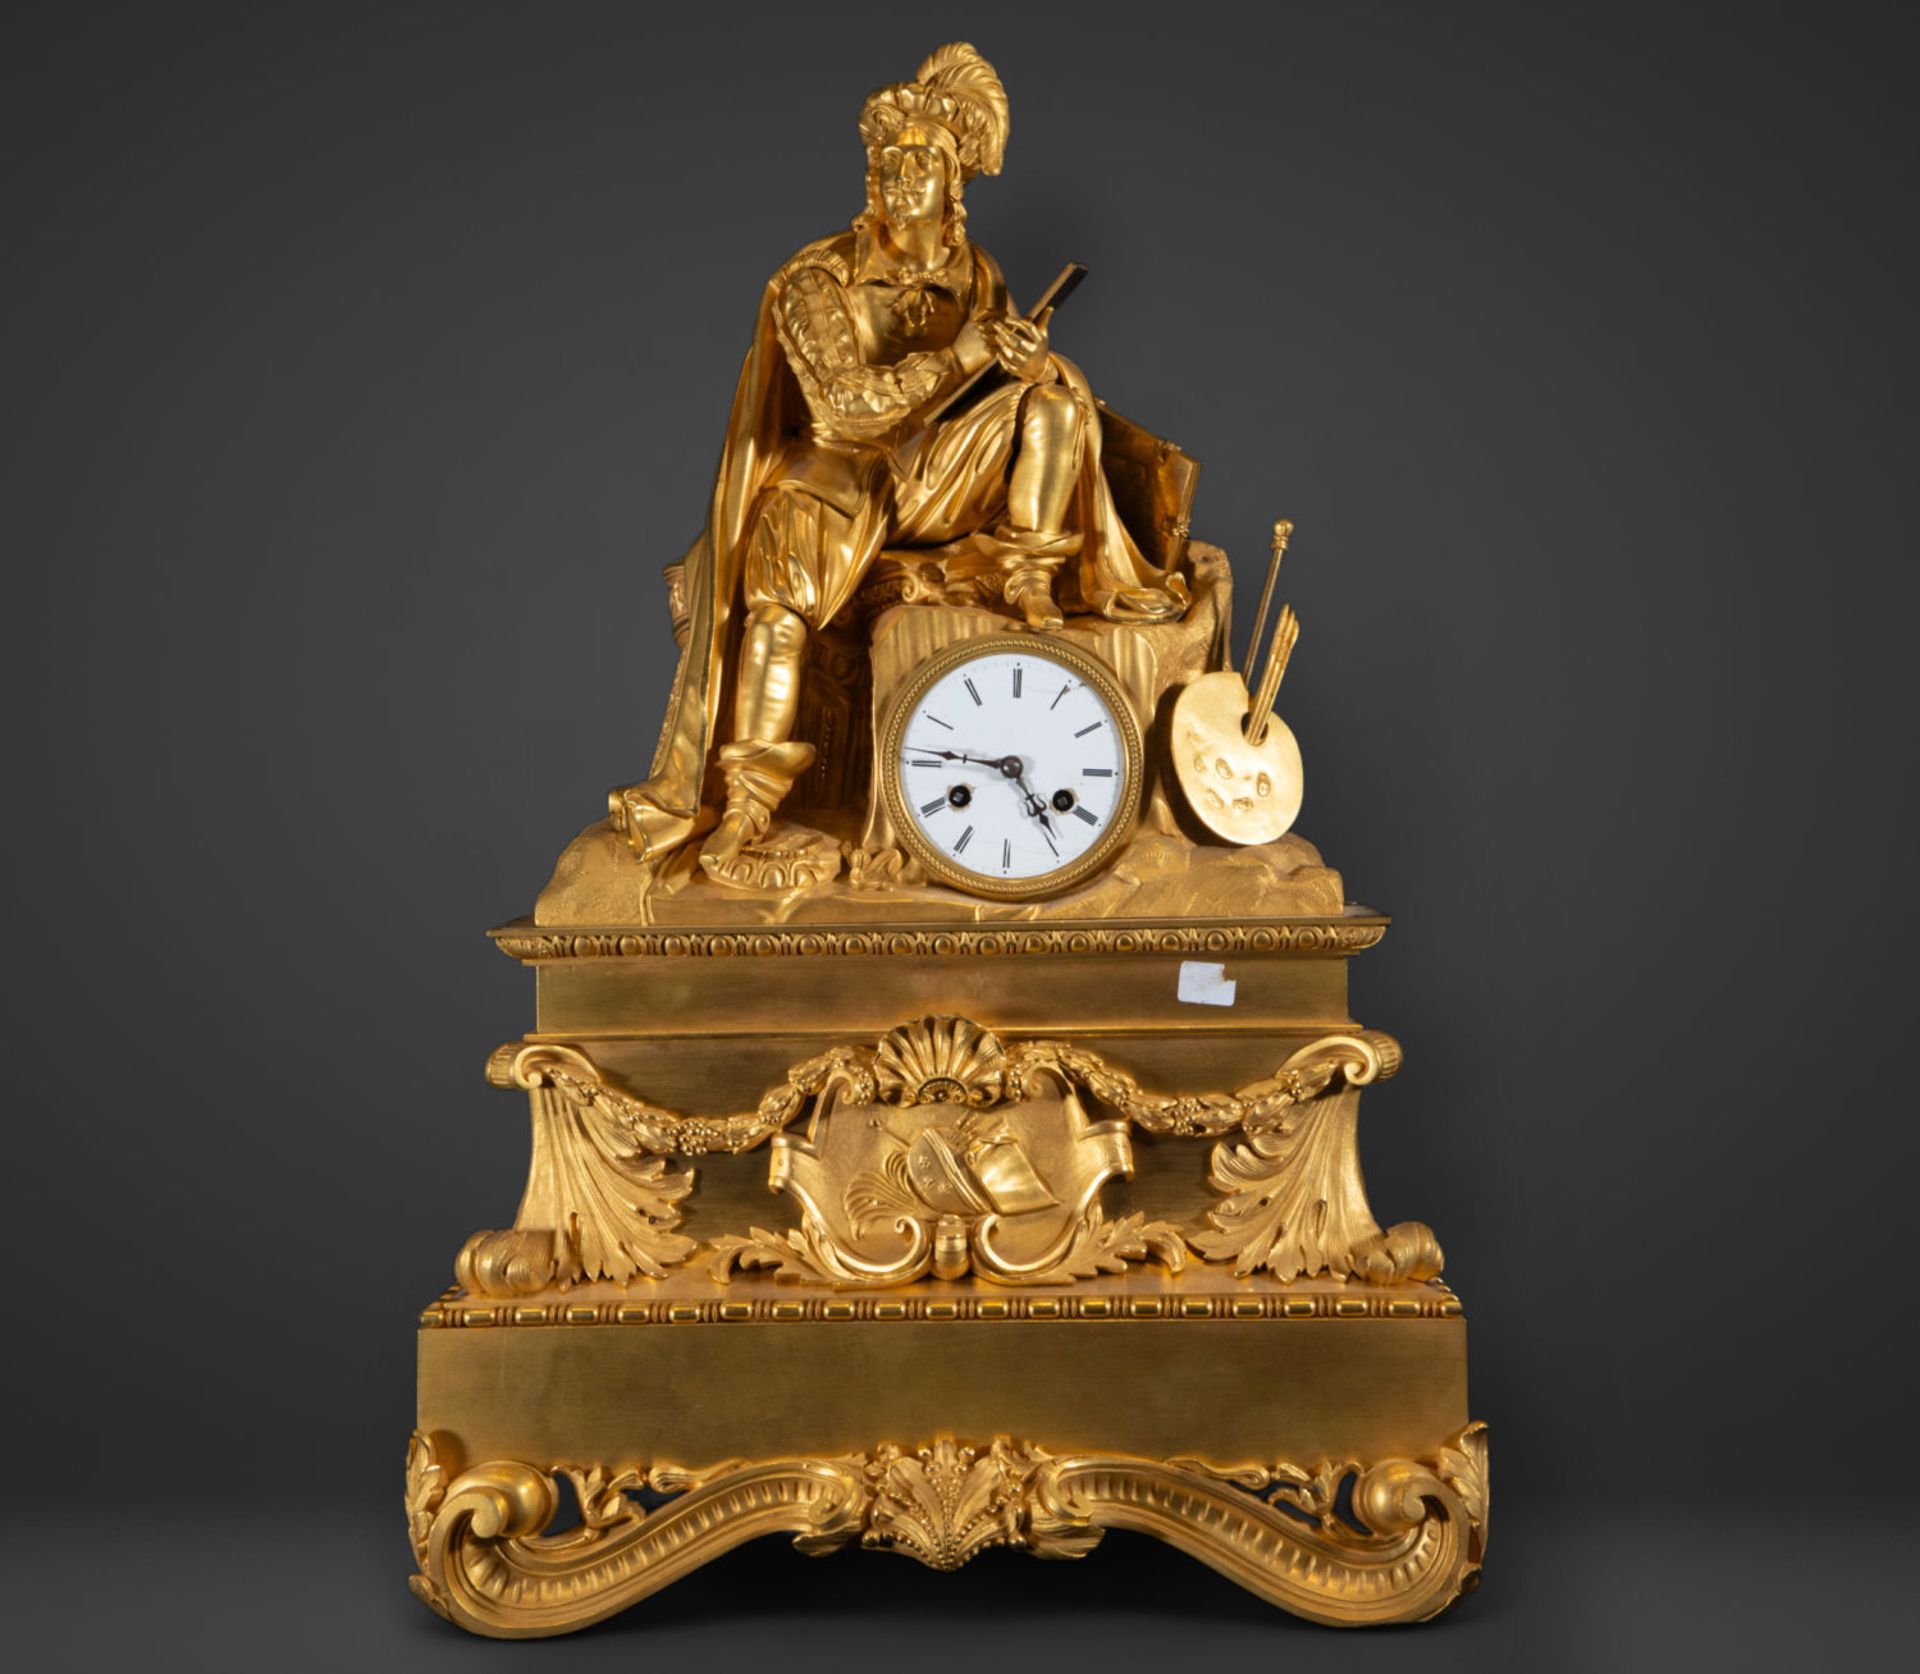 Large Empire table clock with the motif of Michelangelo Buonarroti, 19th century French school